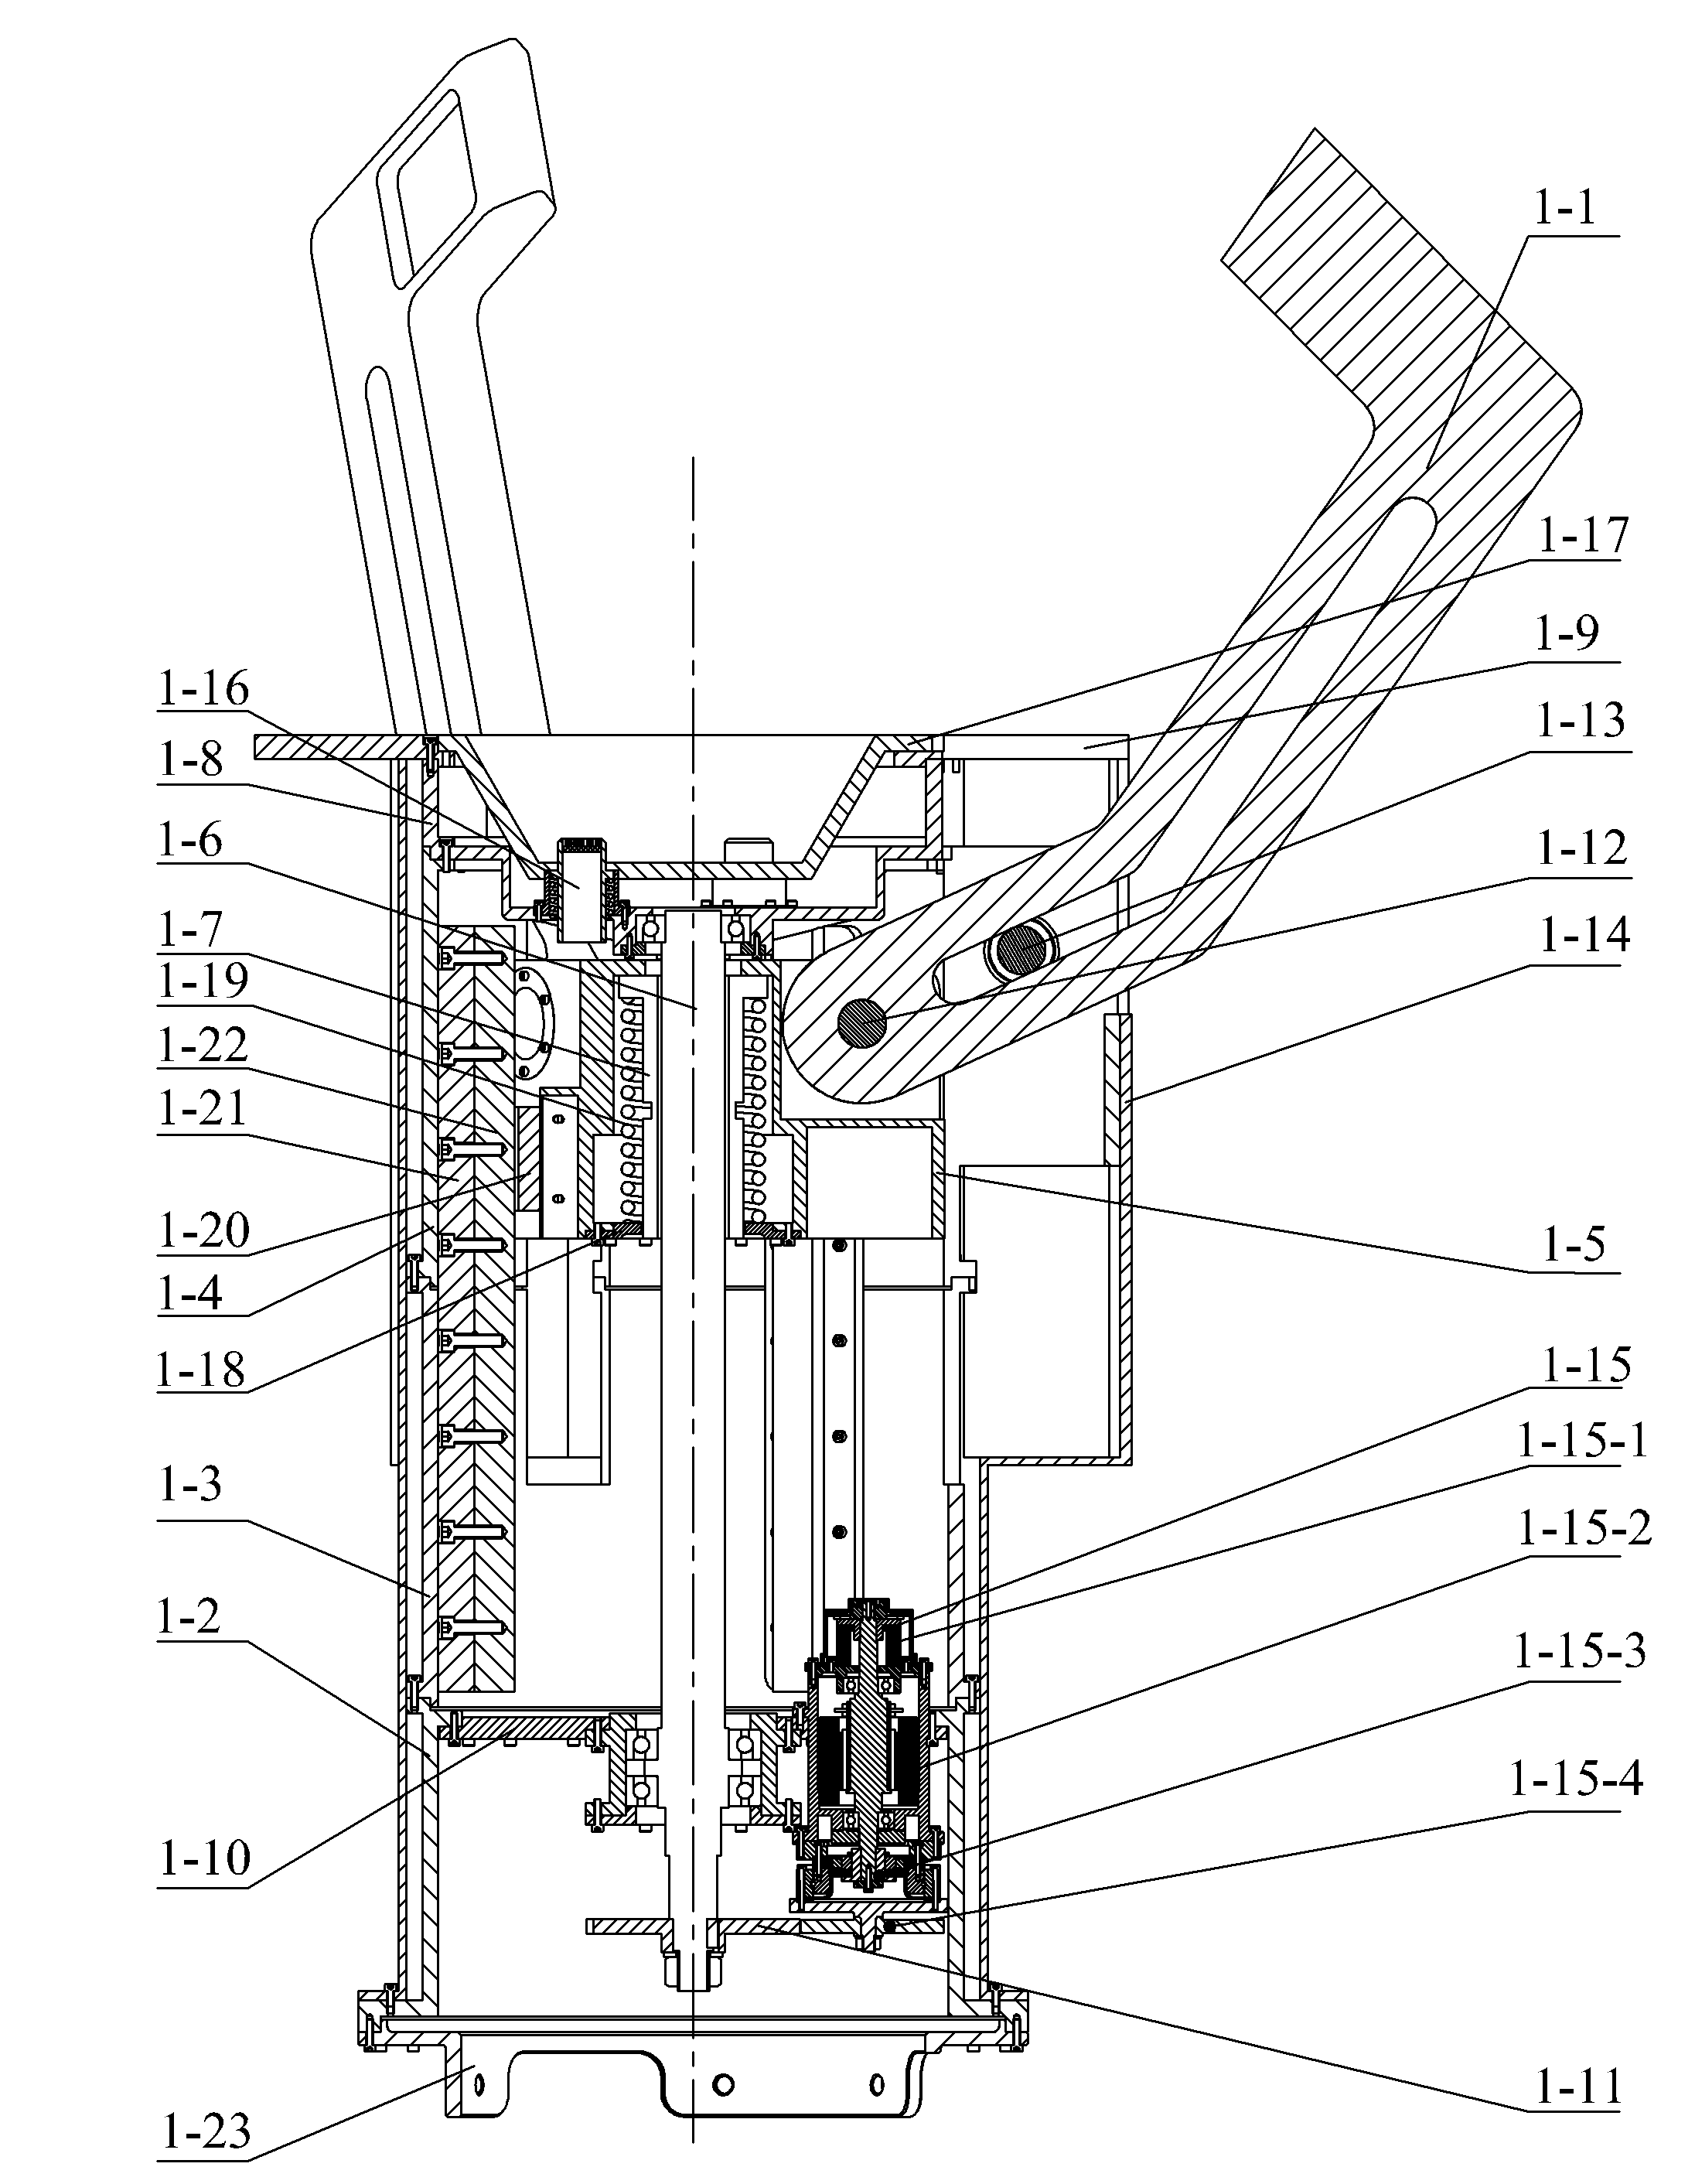 Large-tolerance docking acquisition device focused on space large mechanical arm and rendezvous and docking